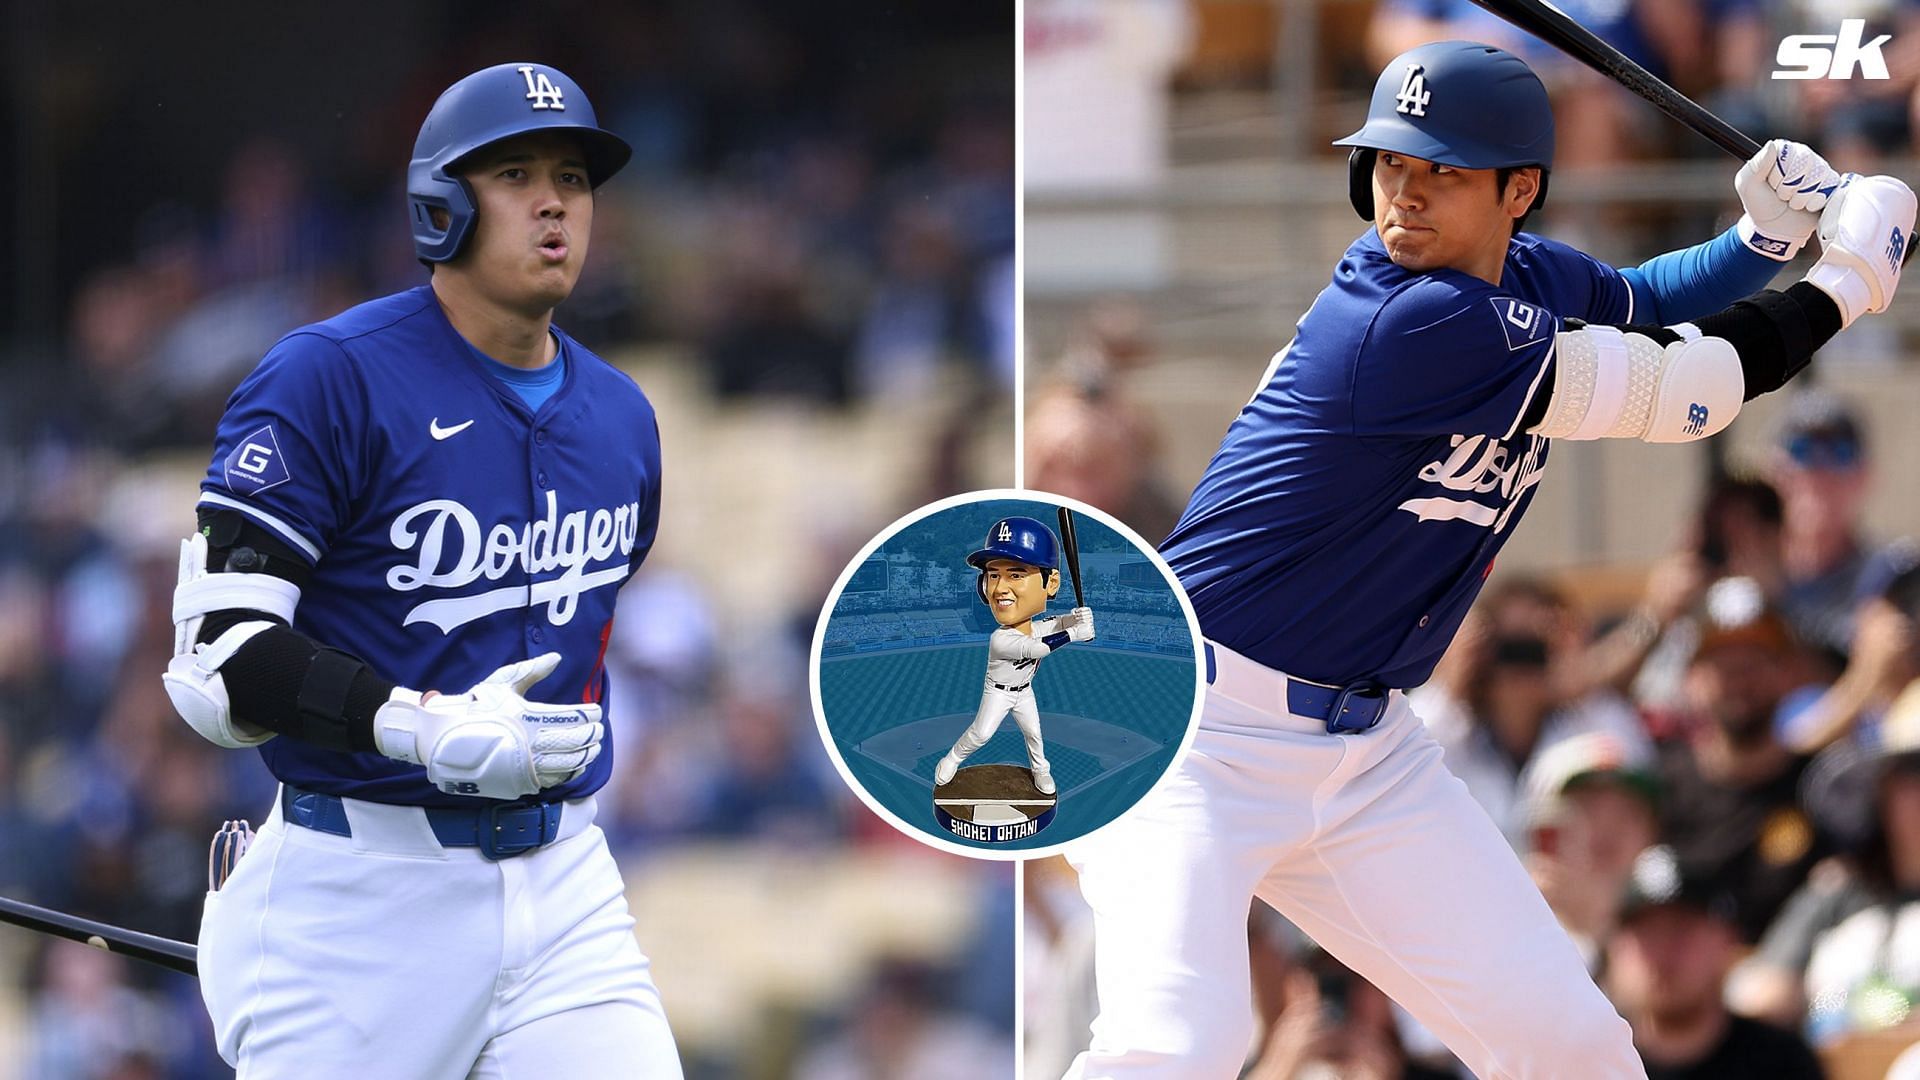 The Los Angeles Dodgers will be giving out 40,000 Shohei Ohtani bobbleheads on Thursday night